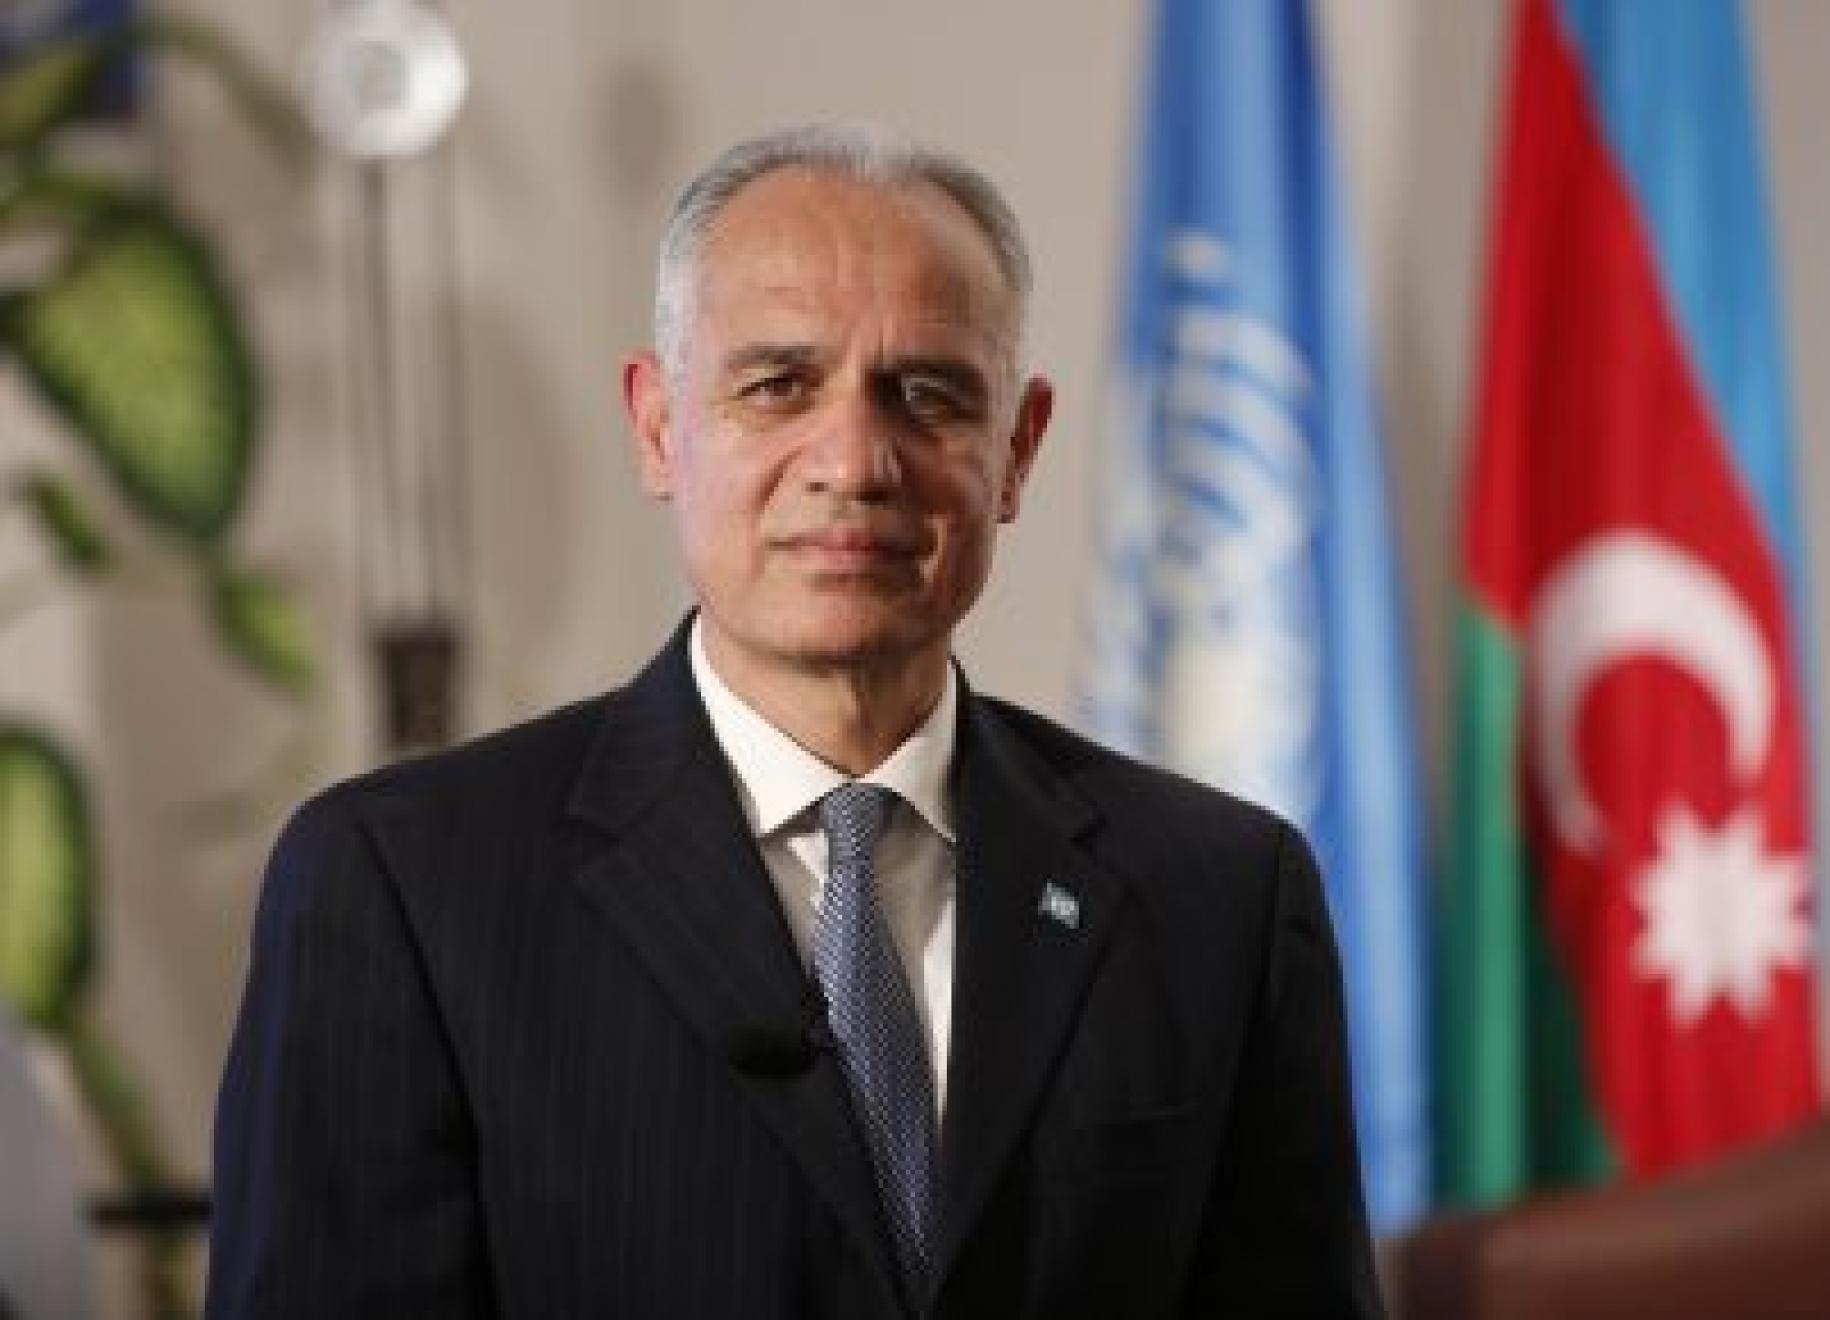 Official photo of the Resident Coordinator, Ghulam M, Isaczai, in front of the UN and Azerbaijan flag. 